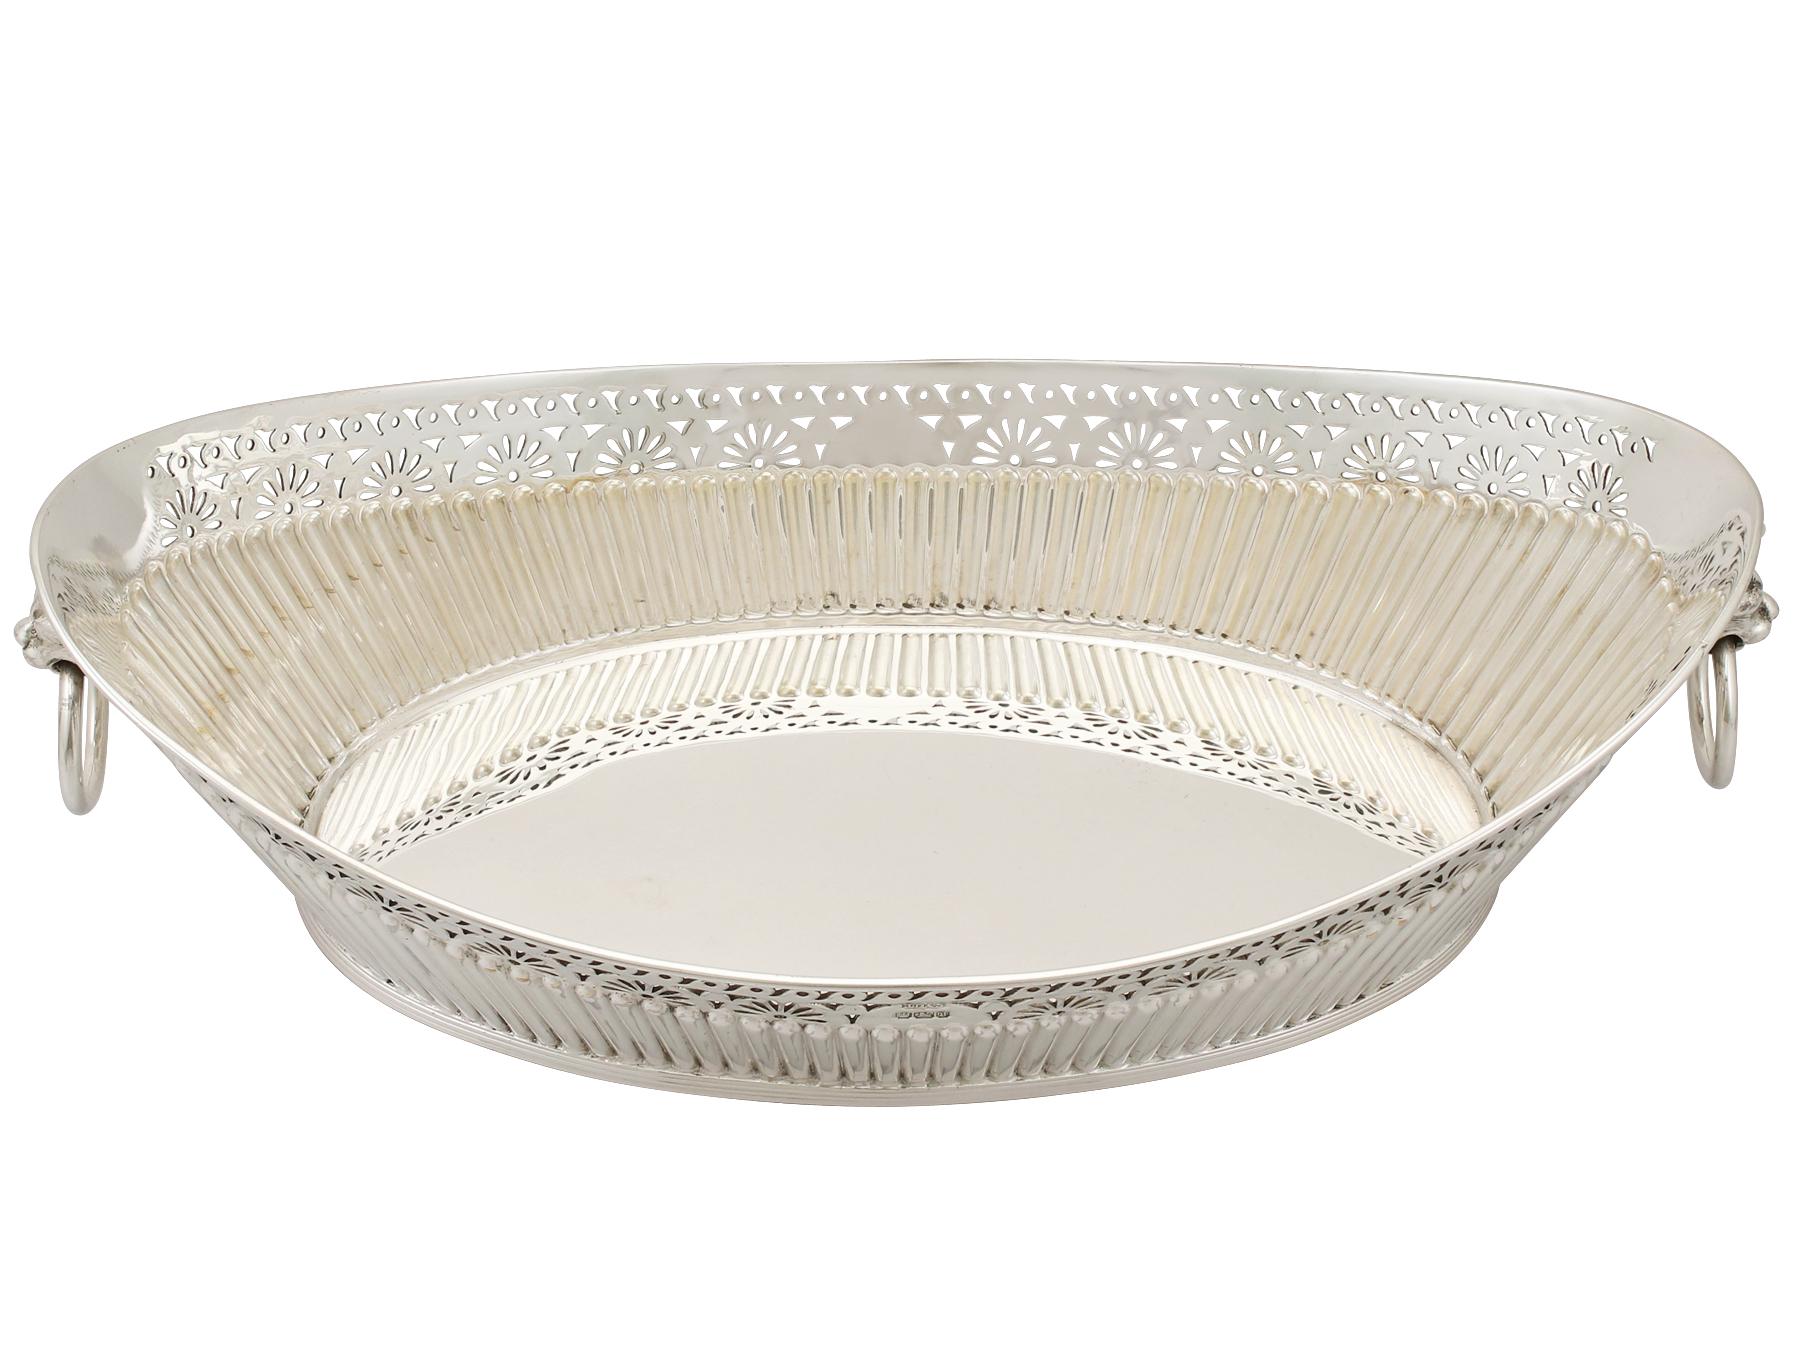 An exceptional, fine and impressive antique Victorian English sterling silver bread dish; an addition to our dining silverware collection.

This exceptional antique Victorian sterling silver bread dish has a plain oval swept form to a collet style